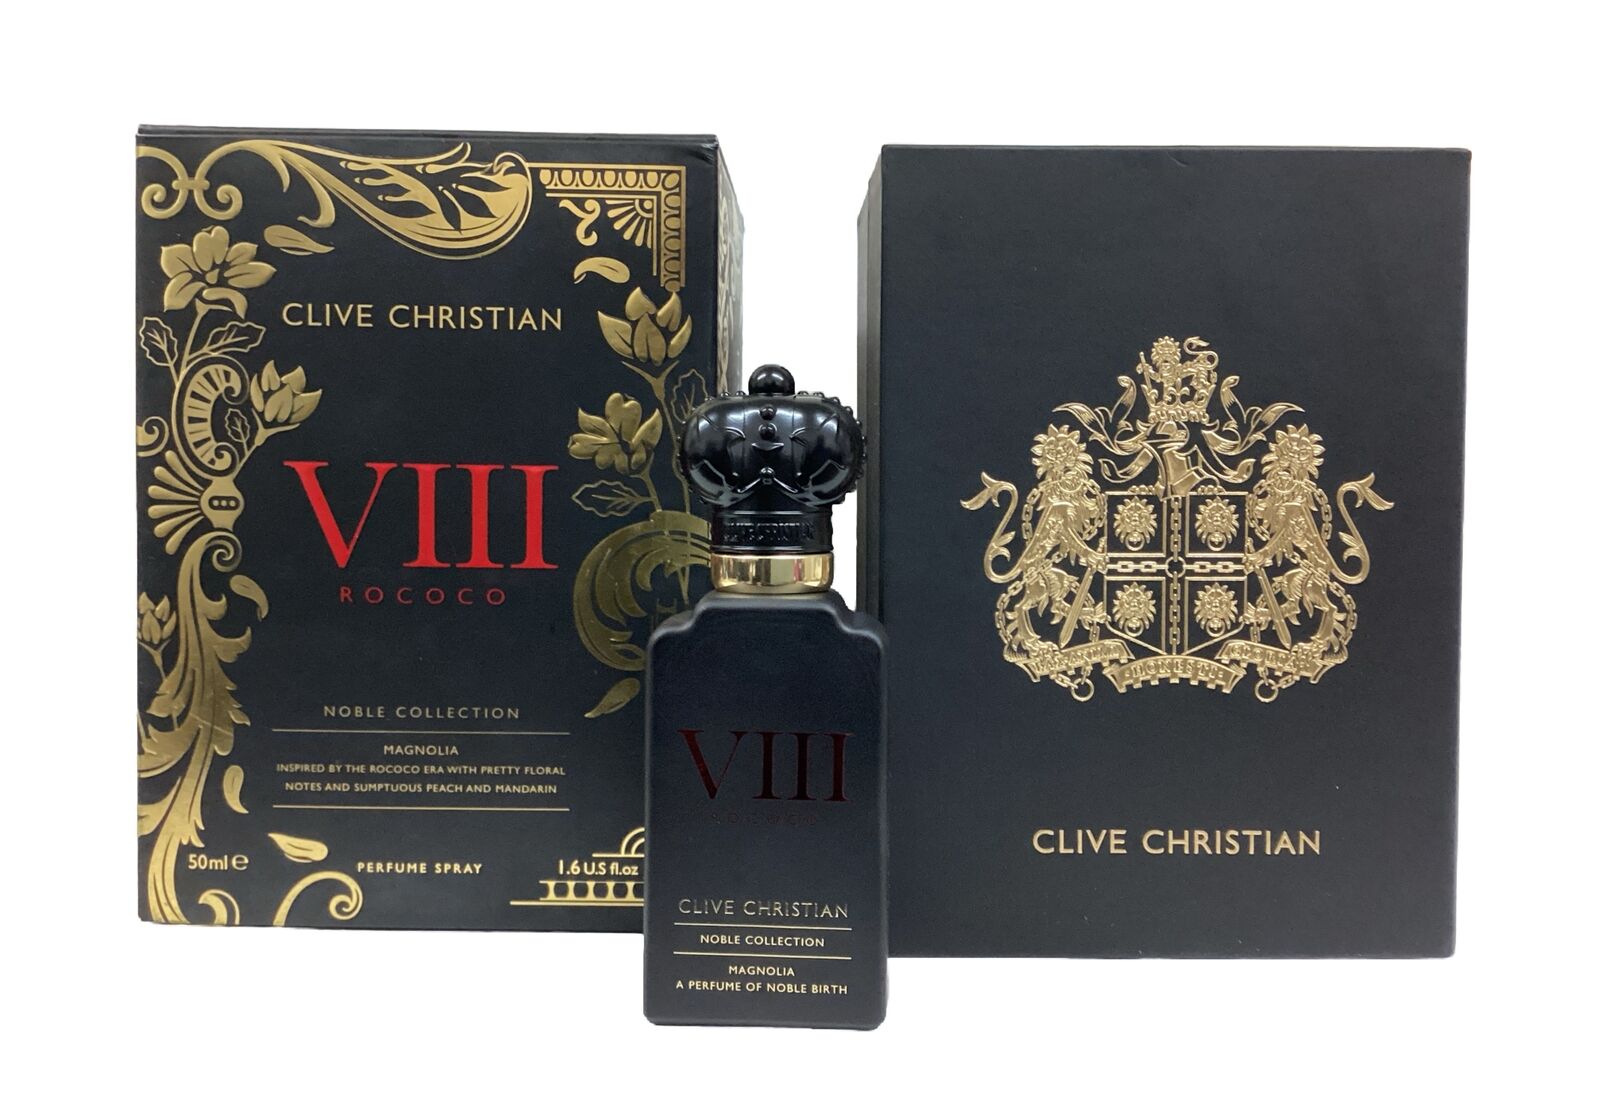 Clive Christian VIII Rococo NOBLE COLLECTION MAGNOLIA 1.6oz As Pictured